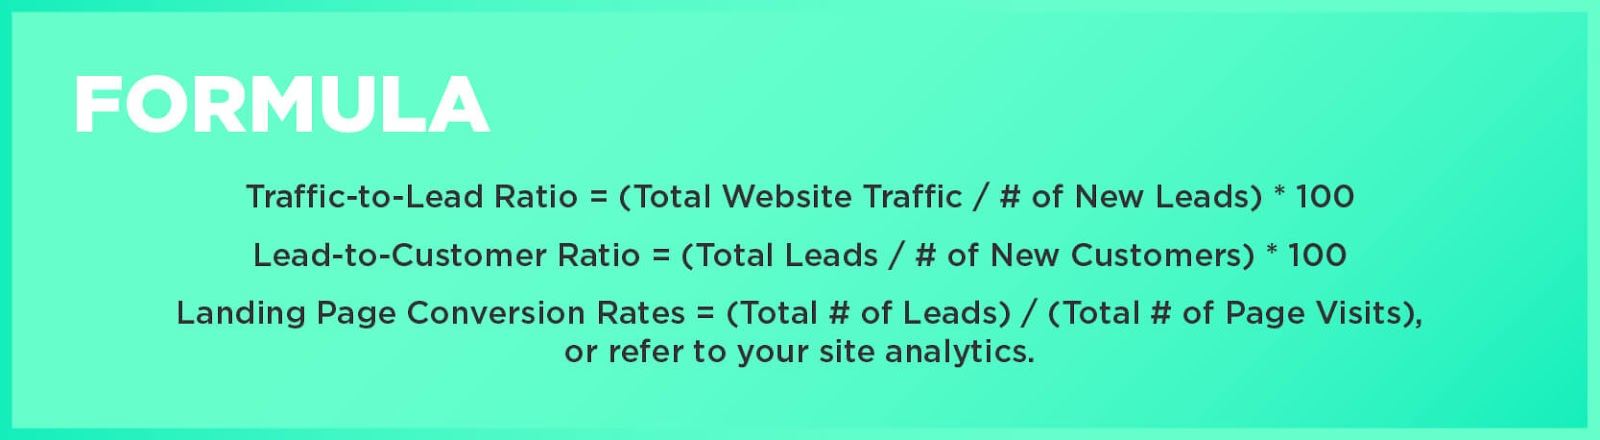 Formulas: Traffic-to-Lead Ratio = (Total Website Traffic / # of New Leads) * 100Lead-to-Customer Ratio = (Total Leads / # of New Customers) * 100Landing Page Conversion Rates = (Total # of Leads) / (Total # of Page Visits), or refer to your site analytics.